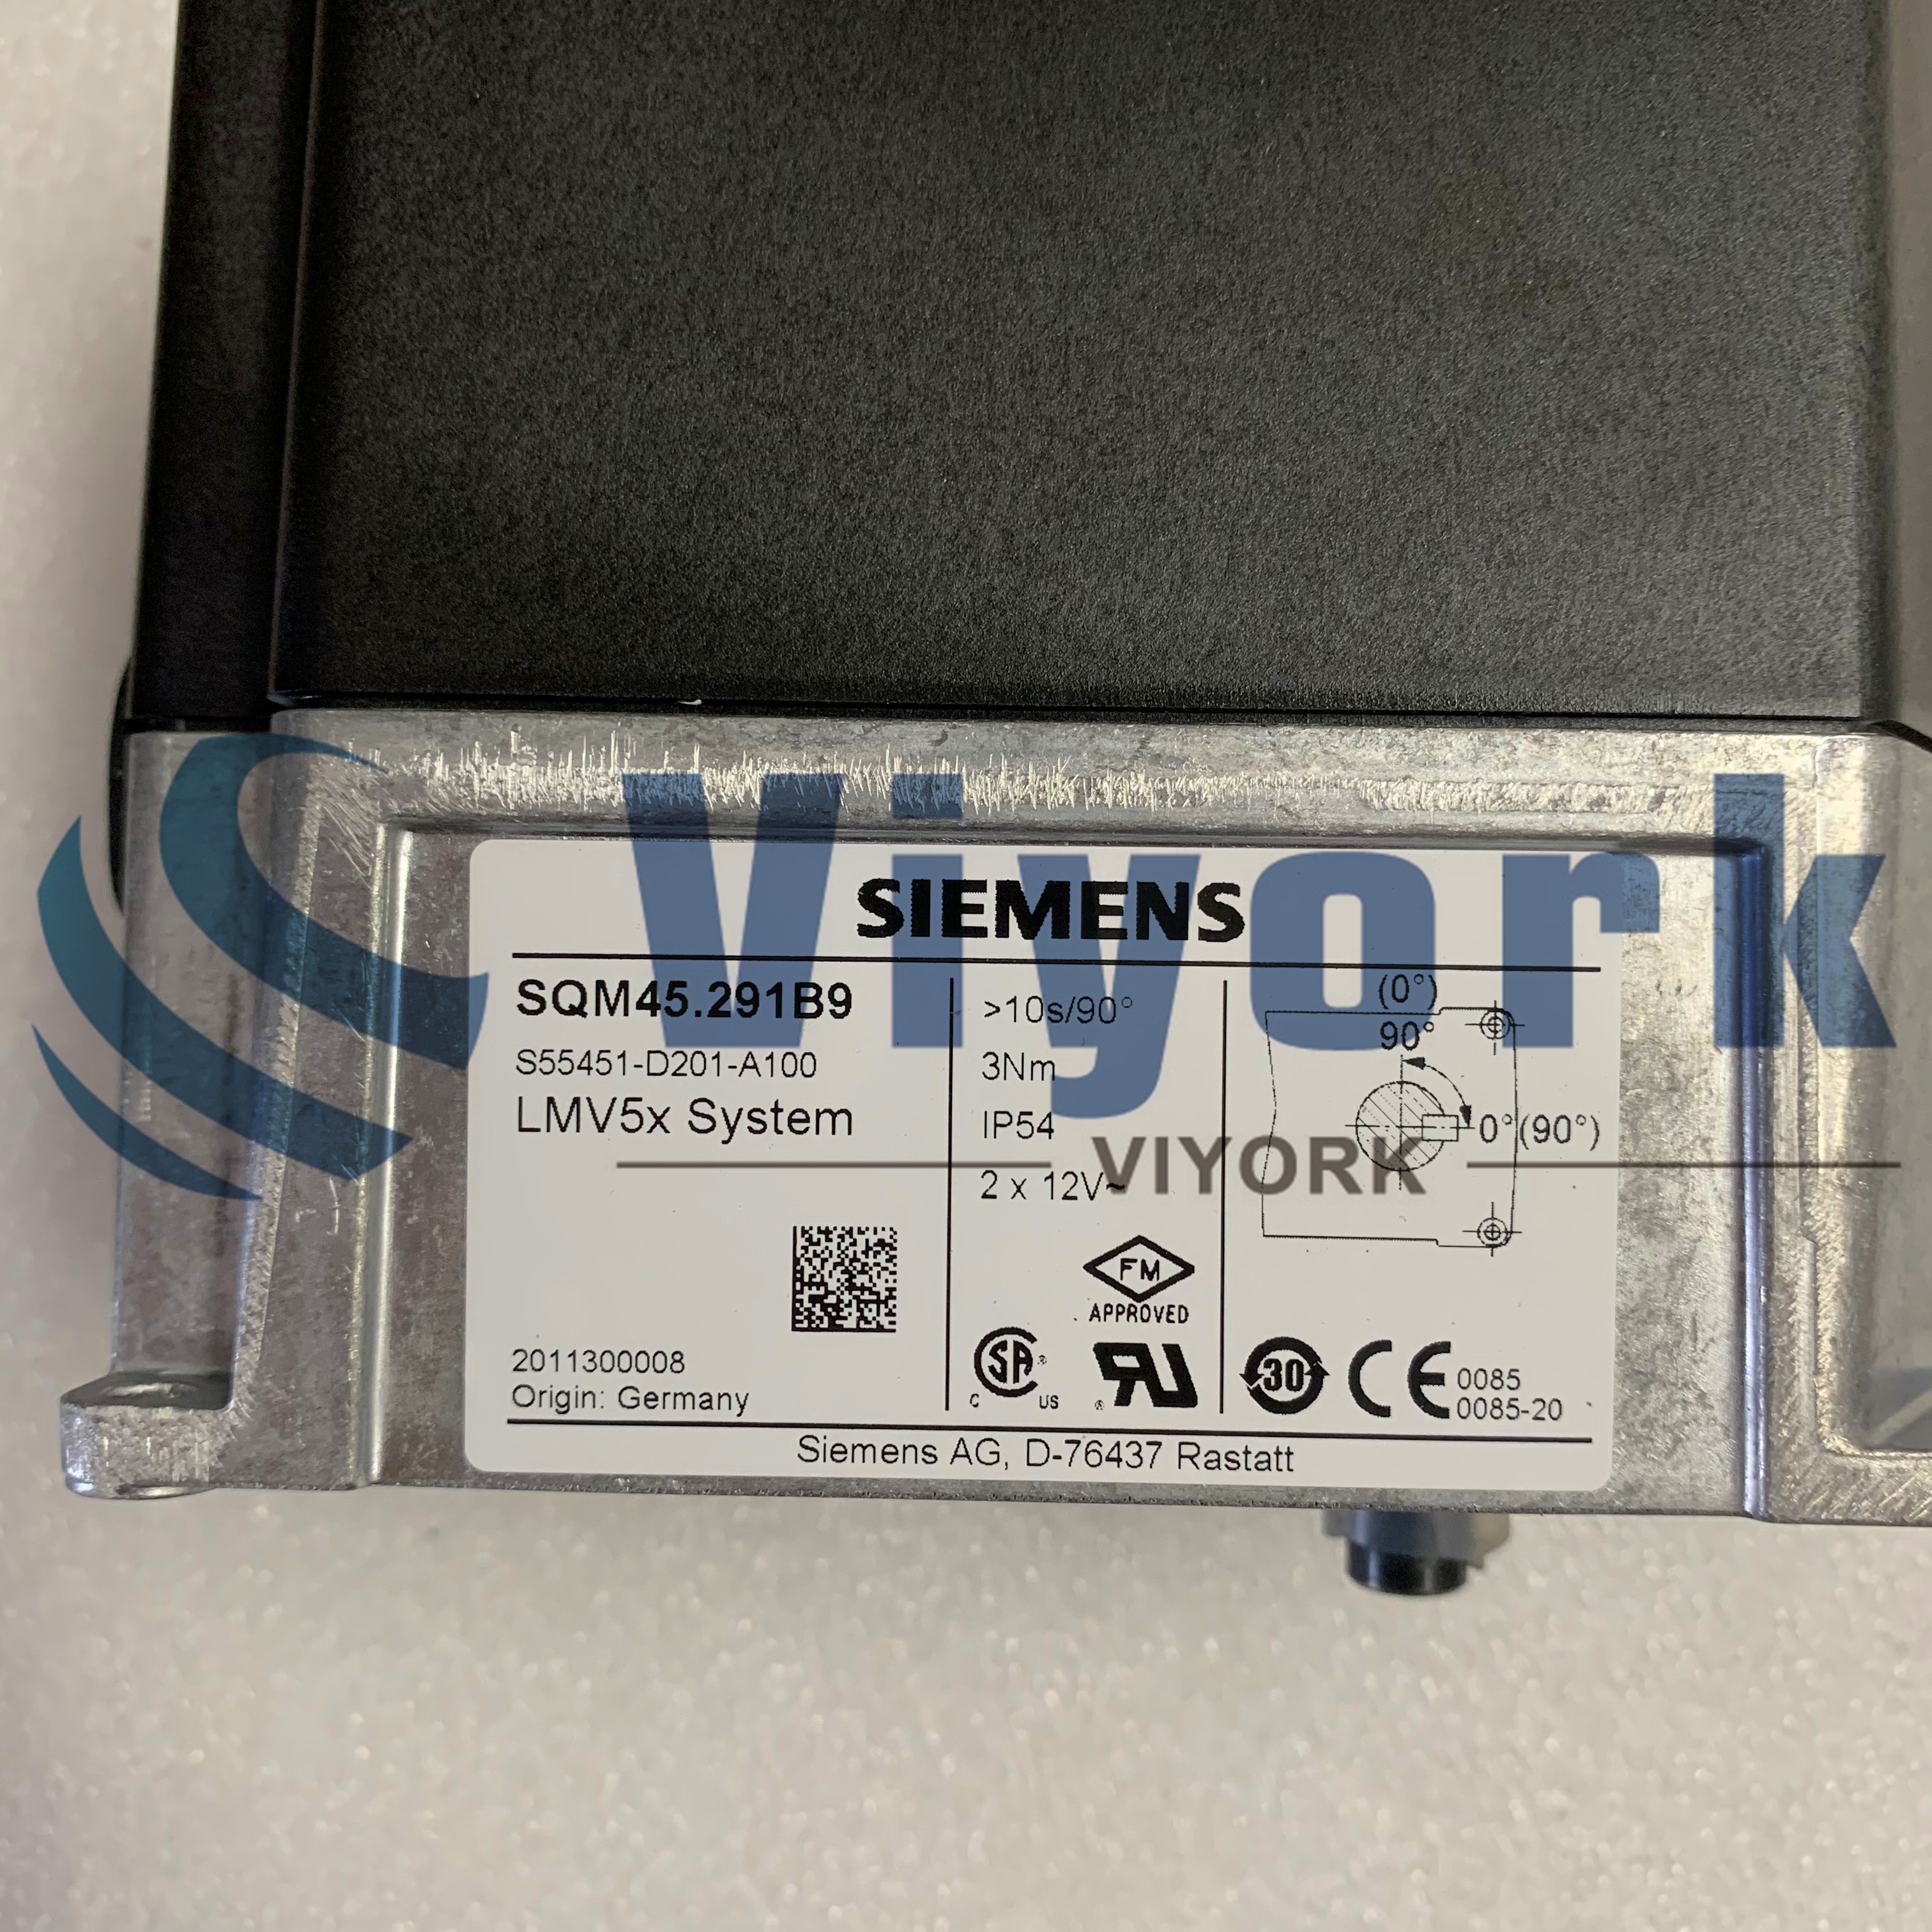 Siemens SQM45.291B9 ACTUATOR 27 INCH-LB TORQUE-UP TO 3NM NEW